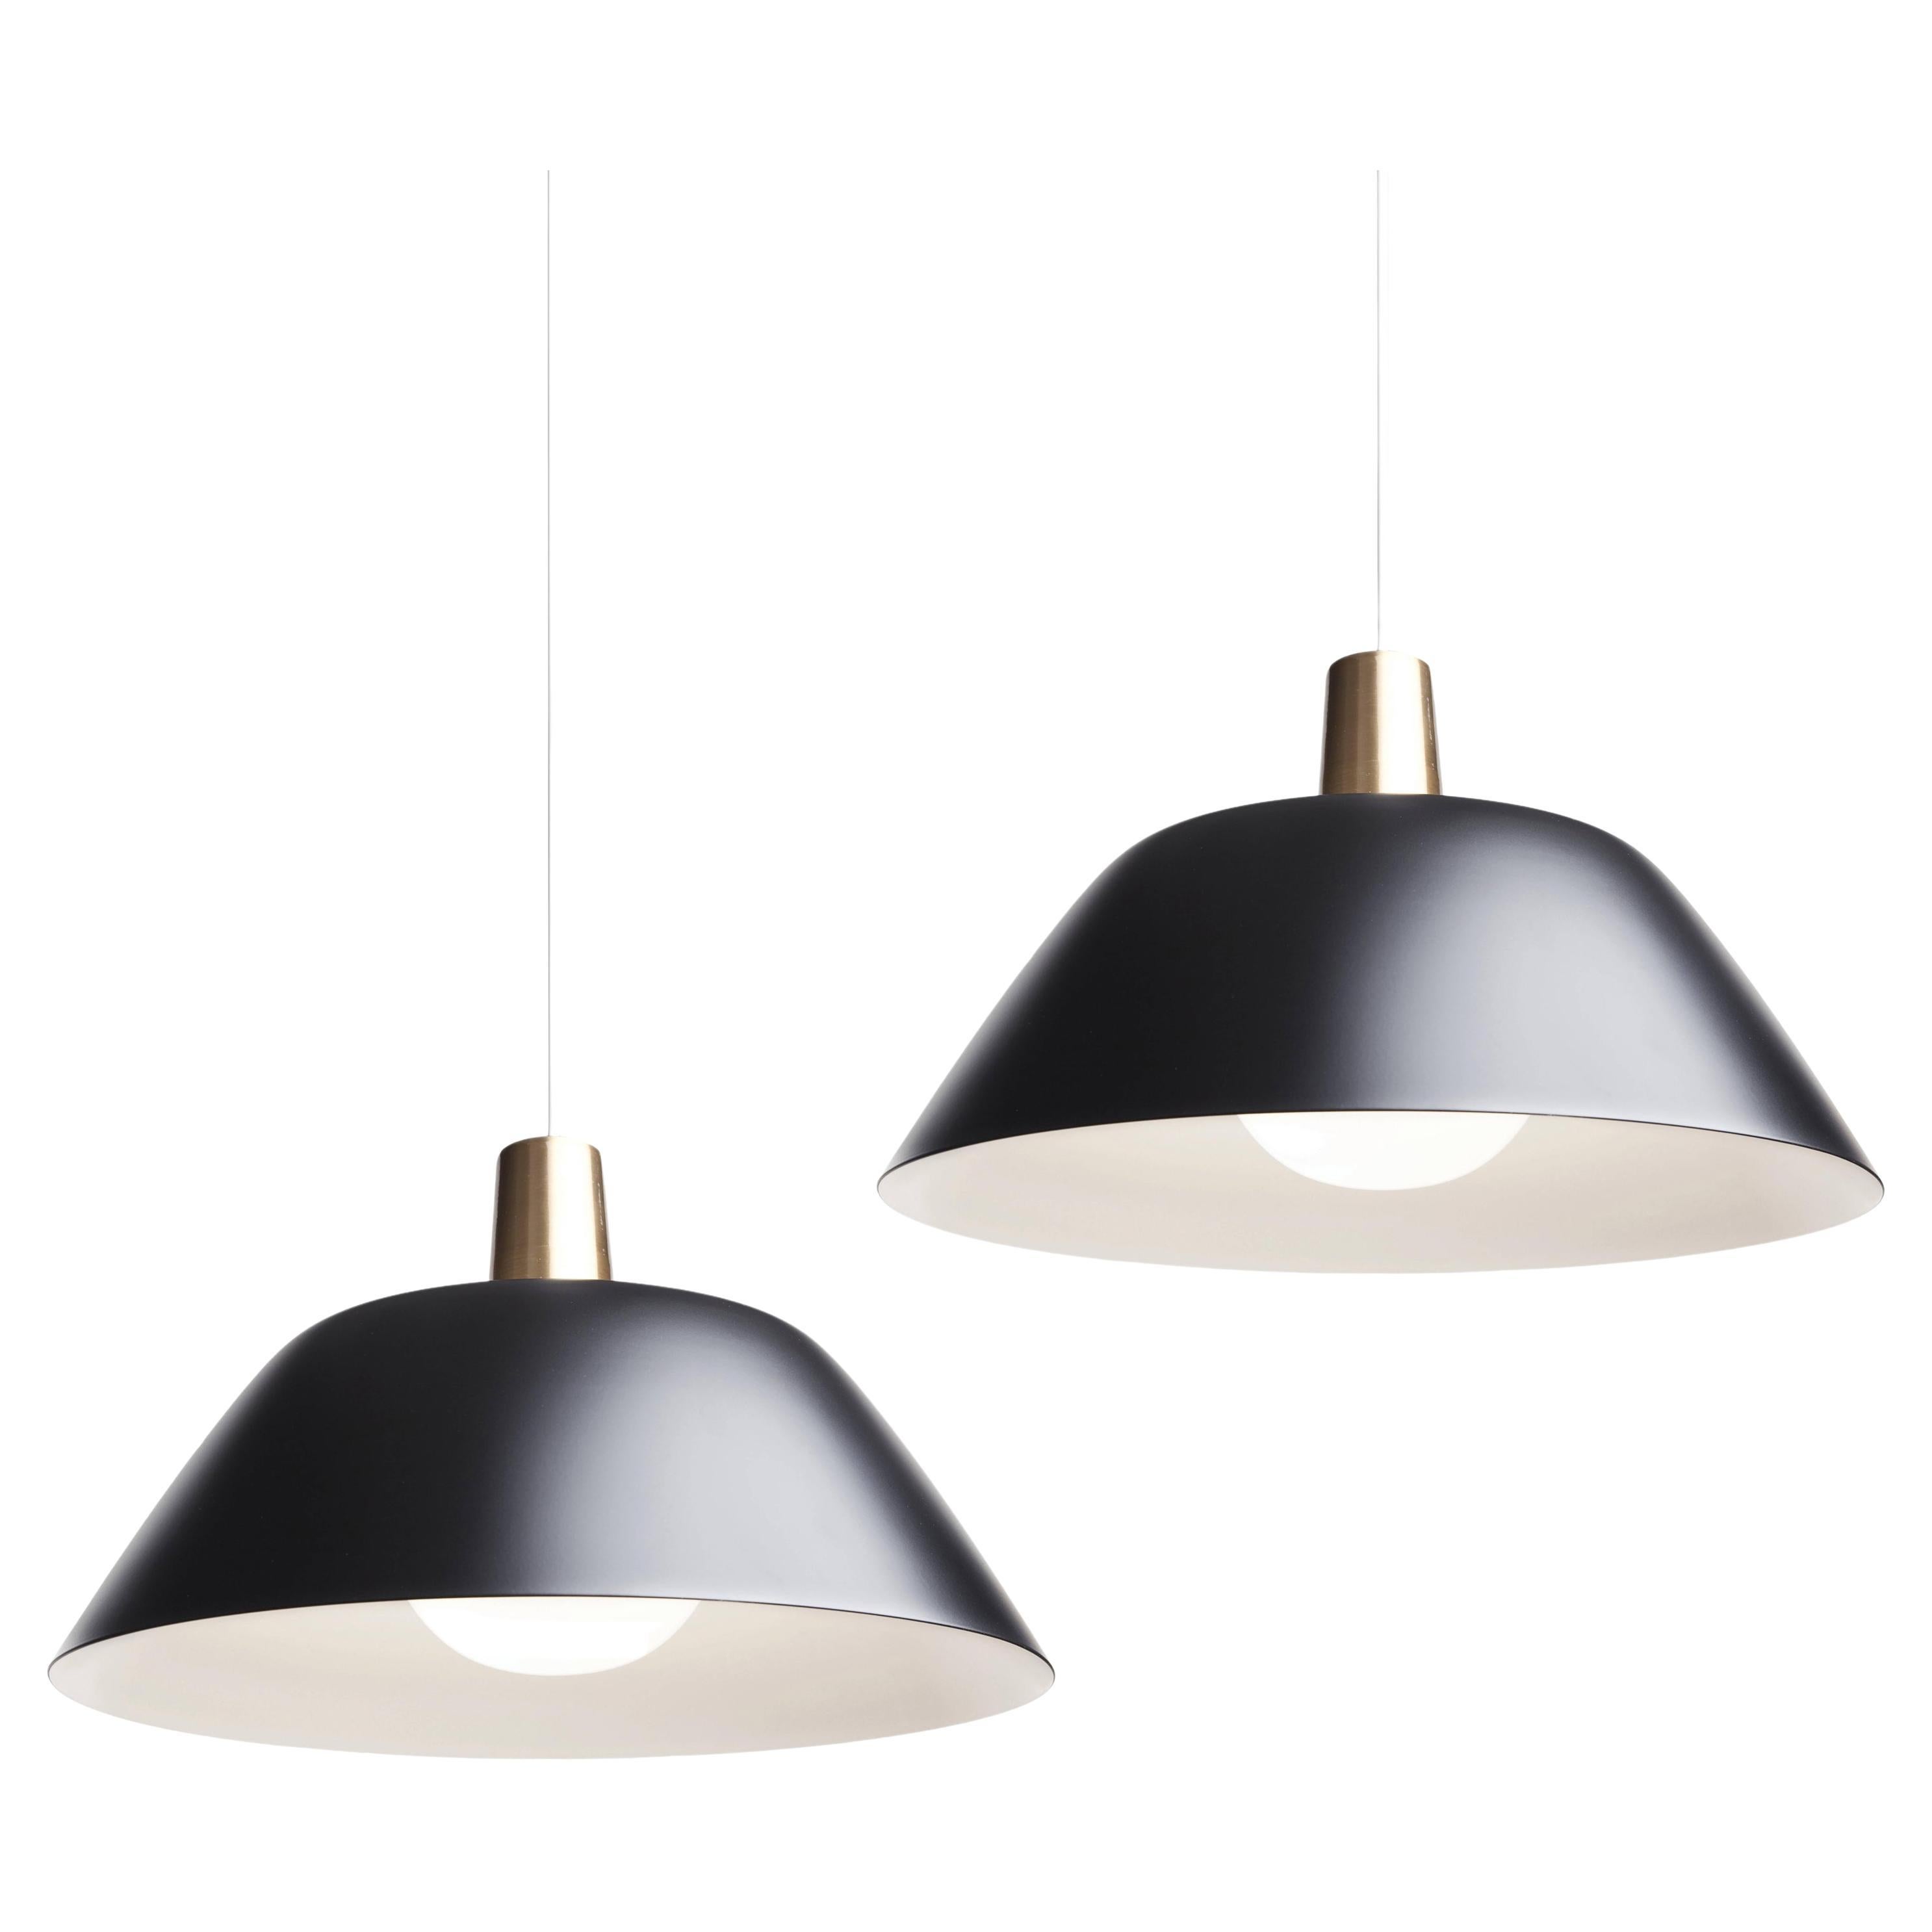 Pair of Lisa Johansson-Pape 'Ihanne' Pendant Lamps for Innolux Oy in Black